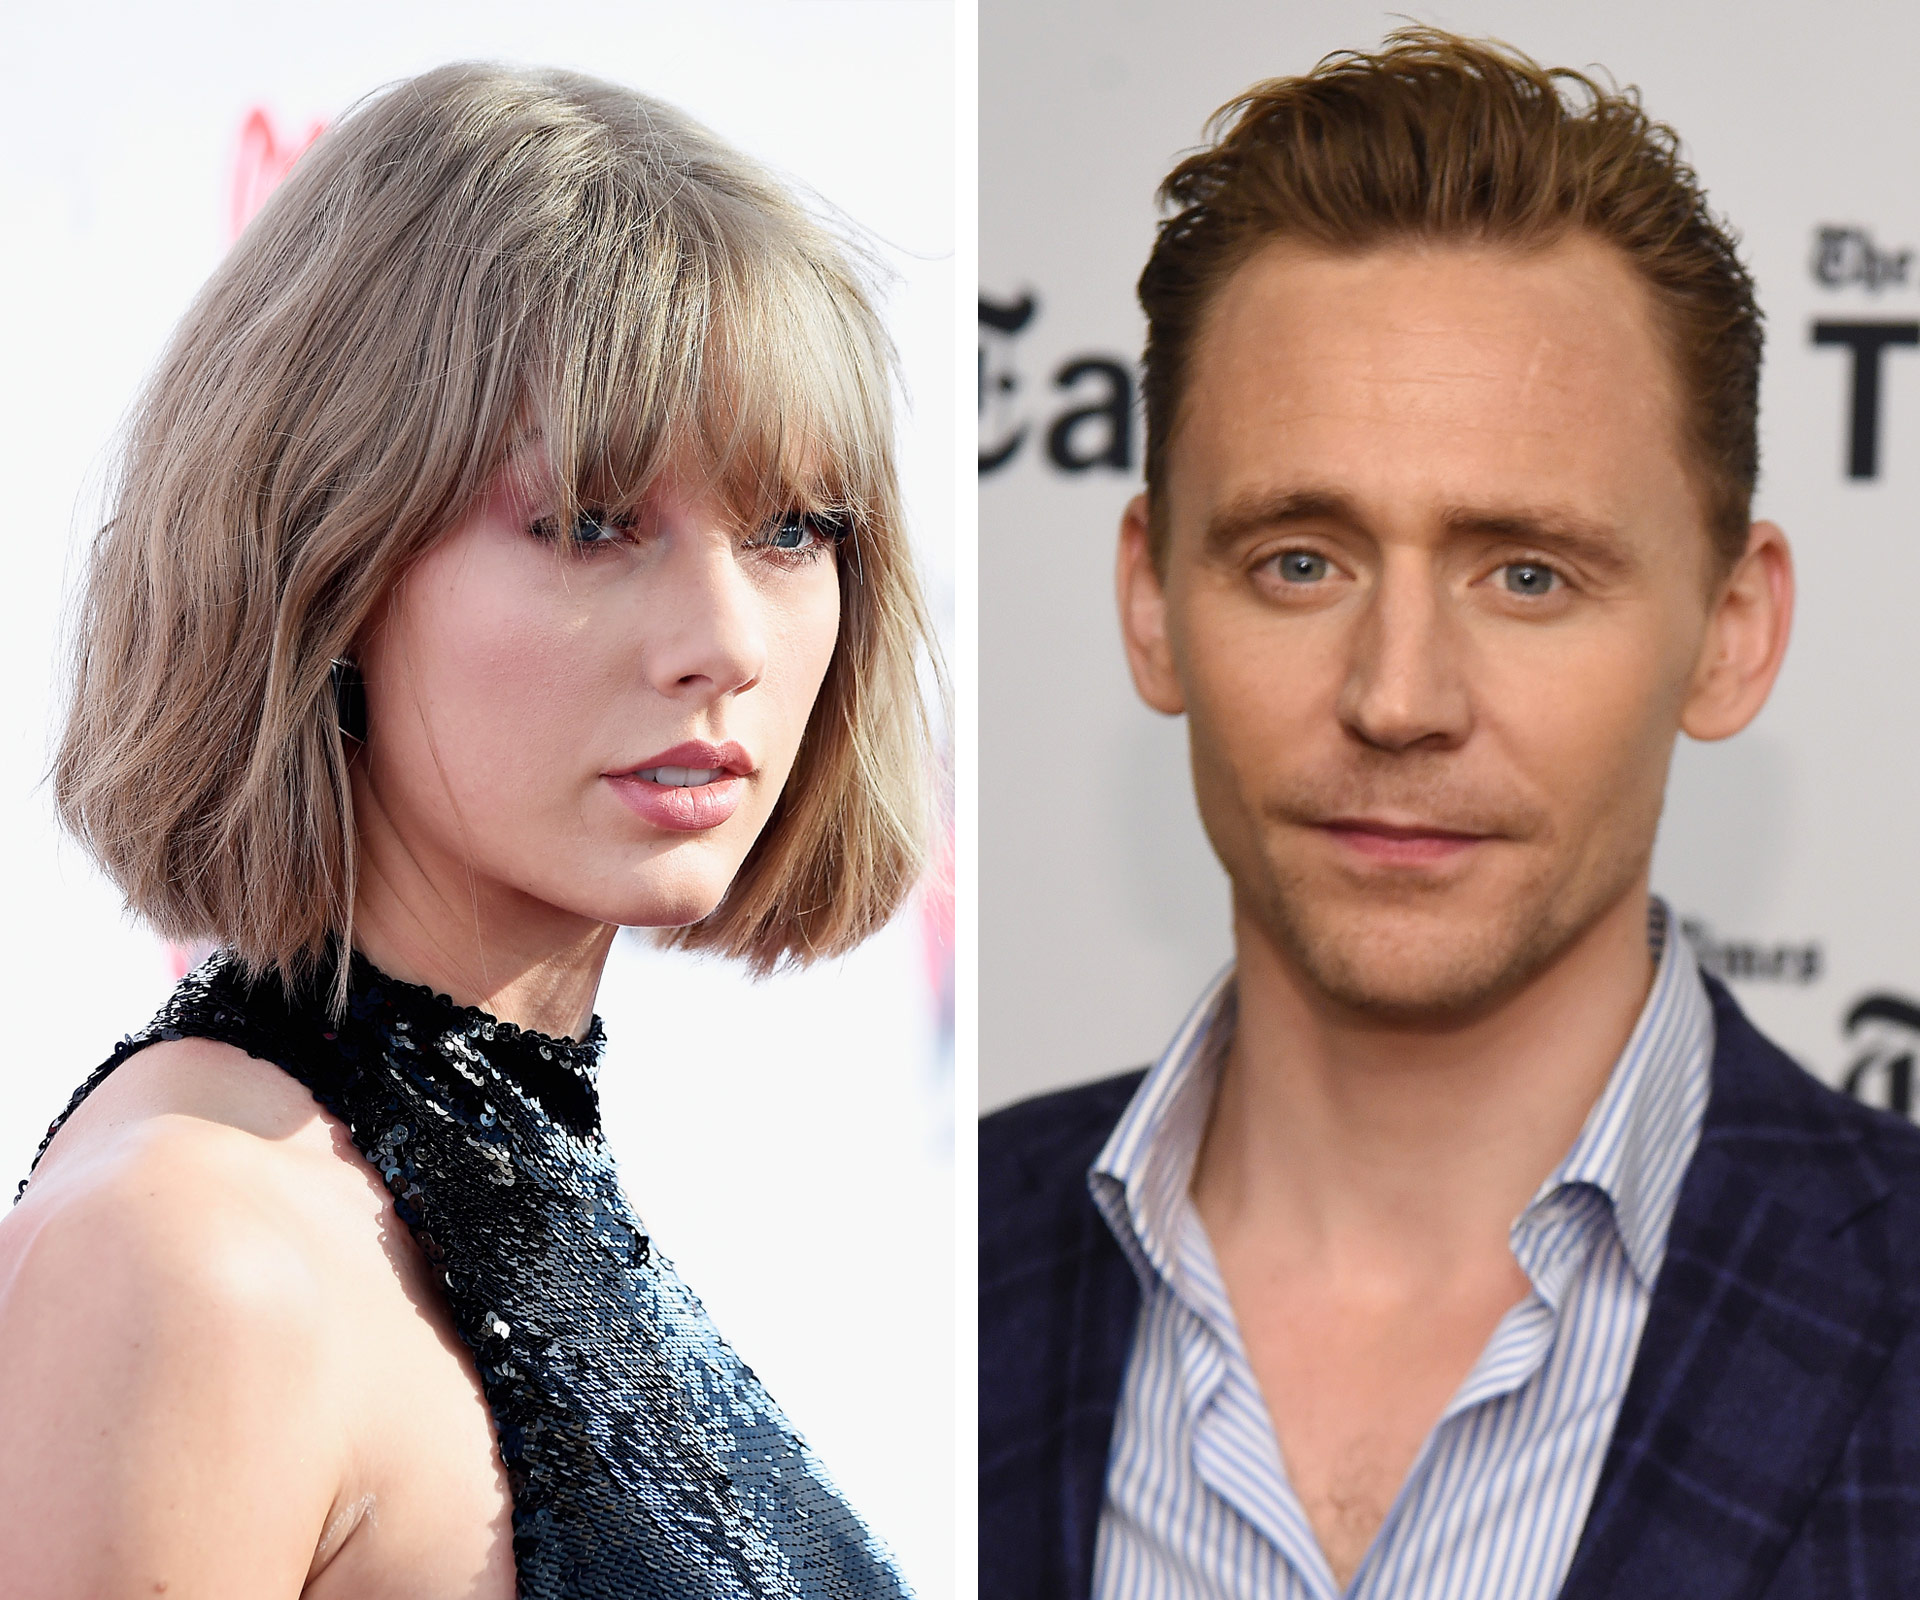 Taylor Swift and Tom Hiddleston